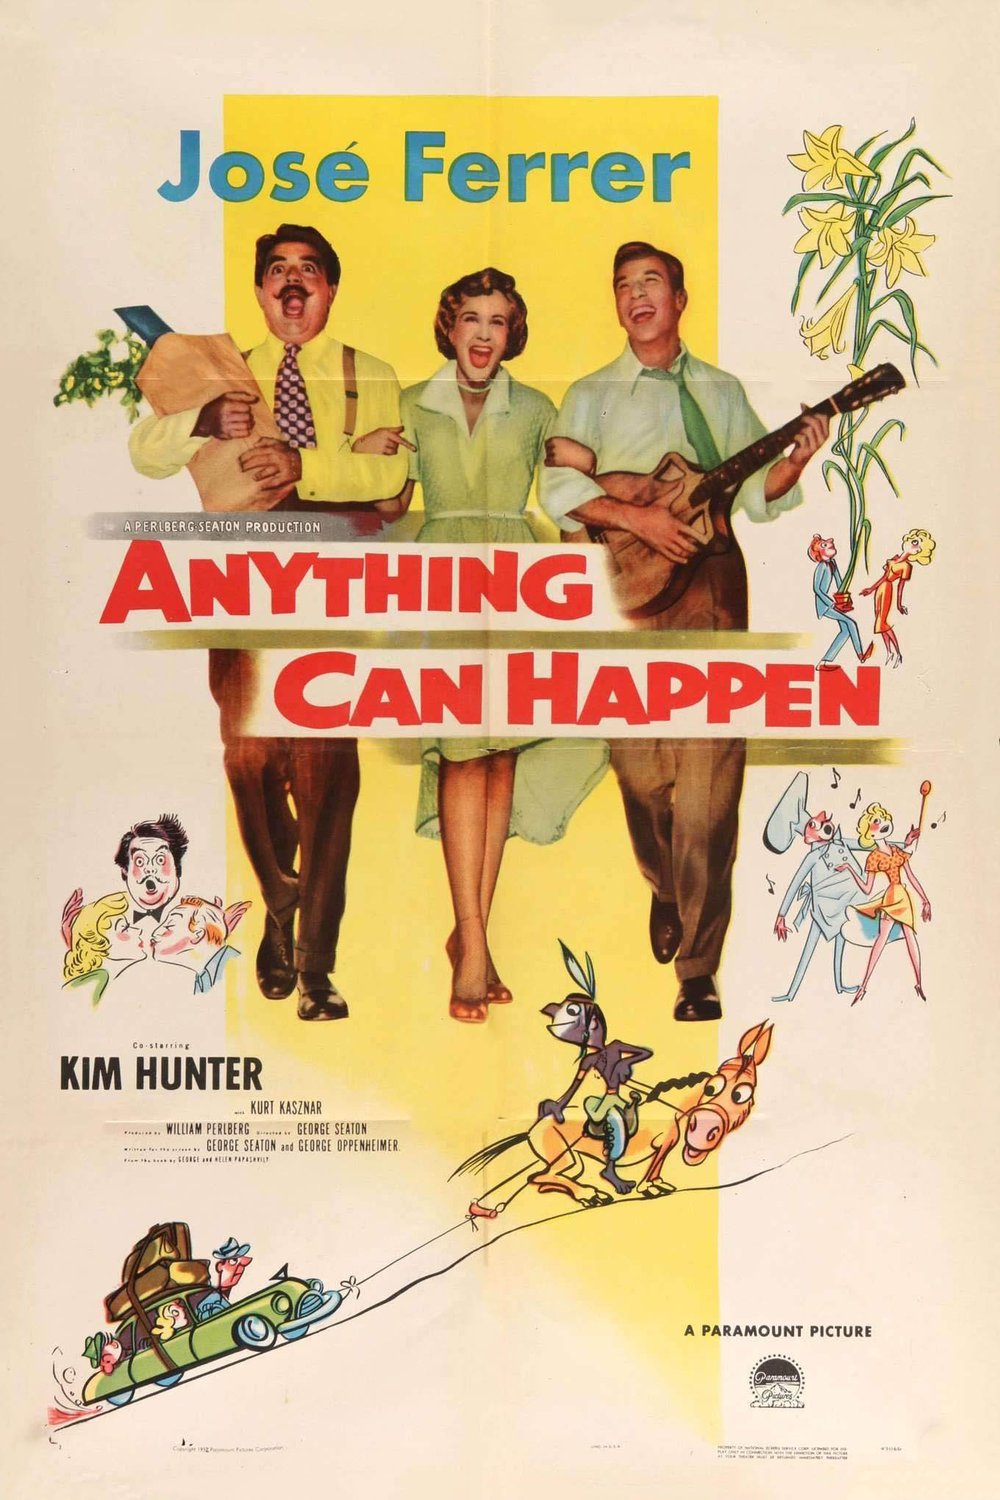 Poster of the movie Anything Can Happen